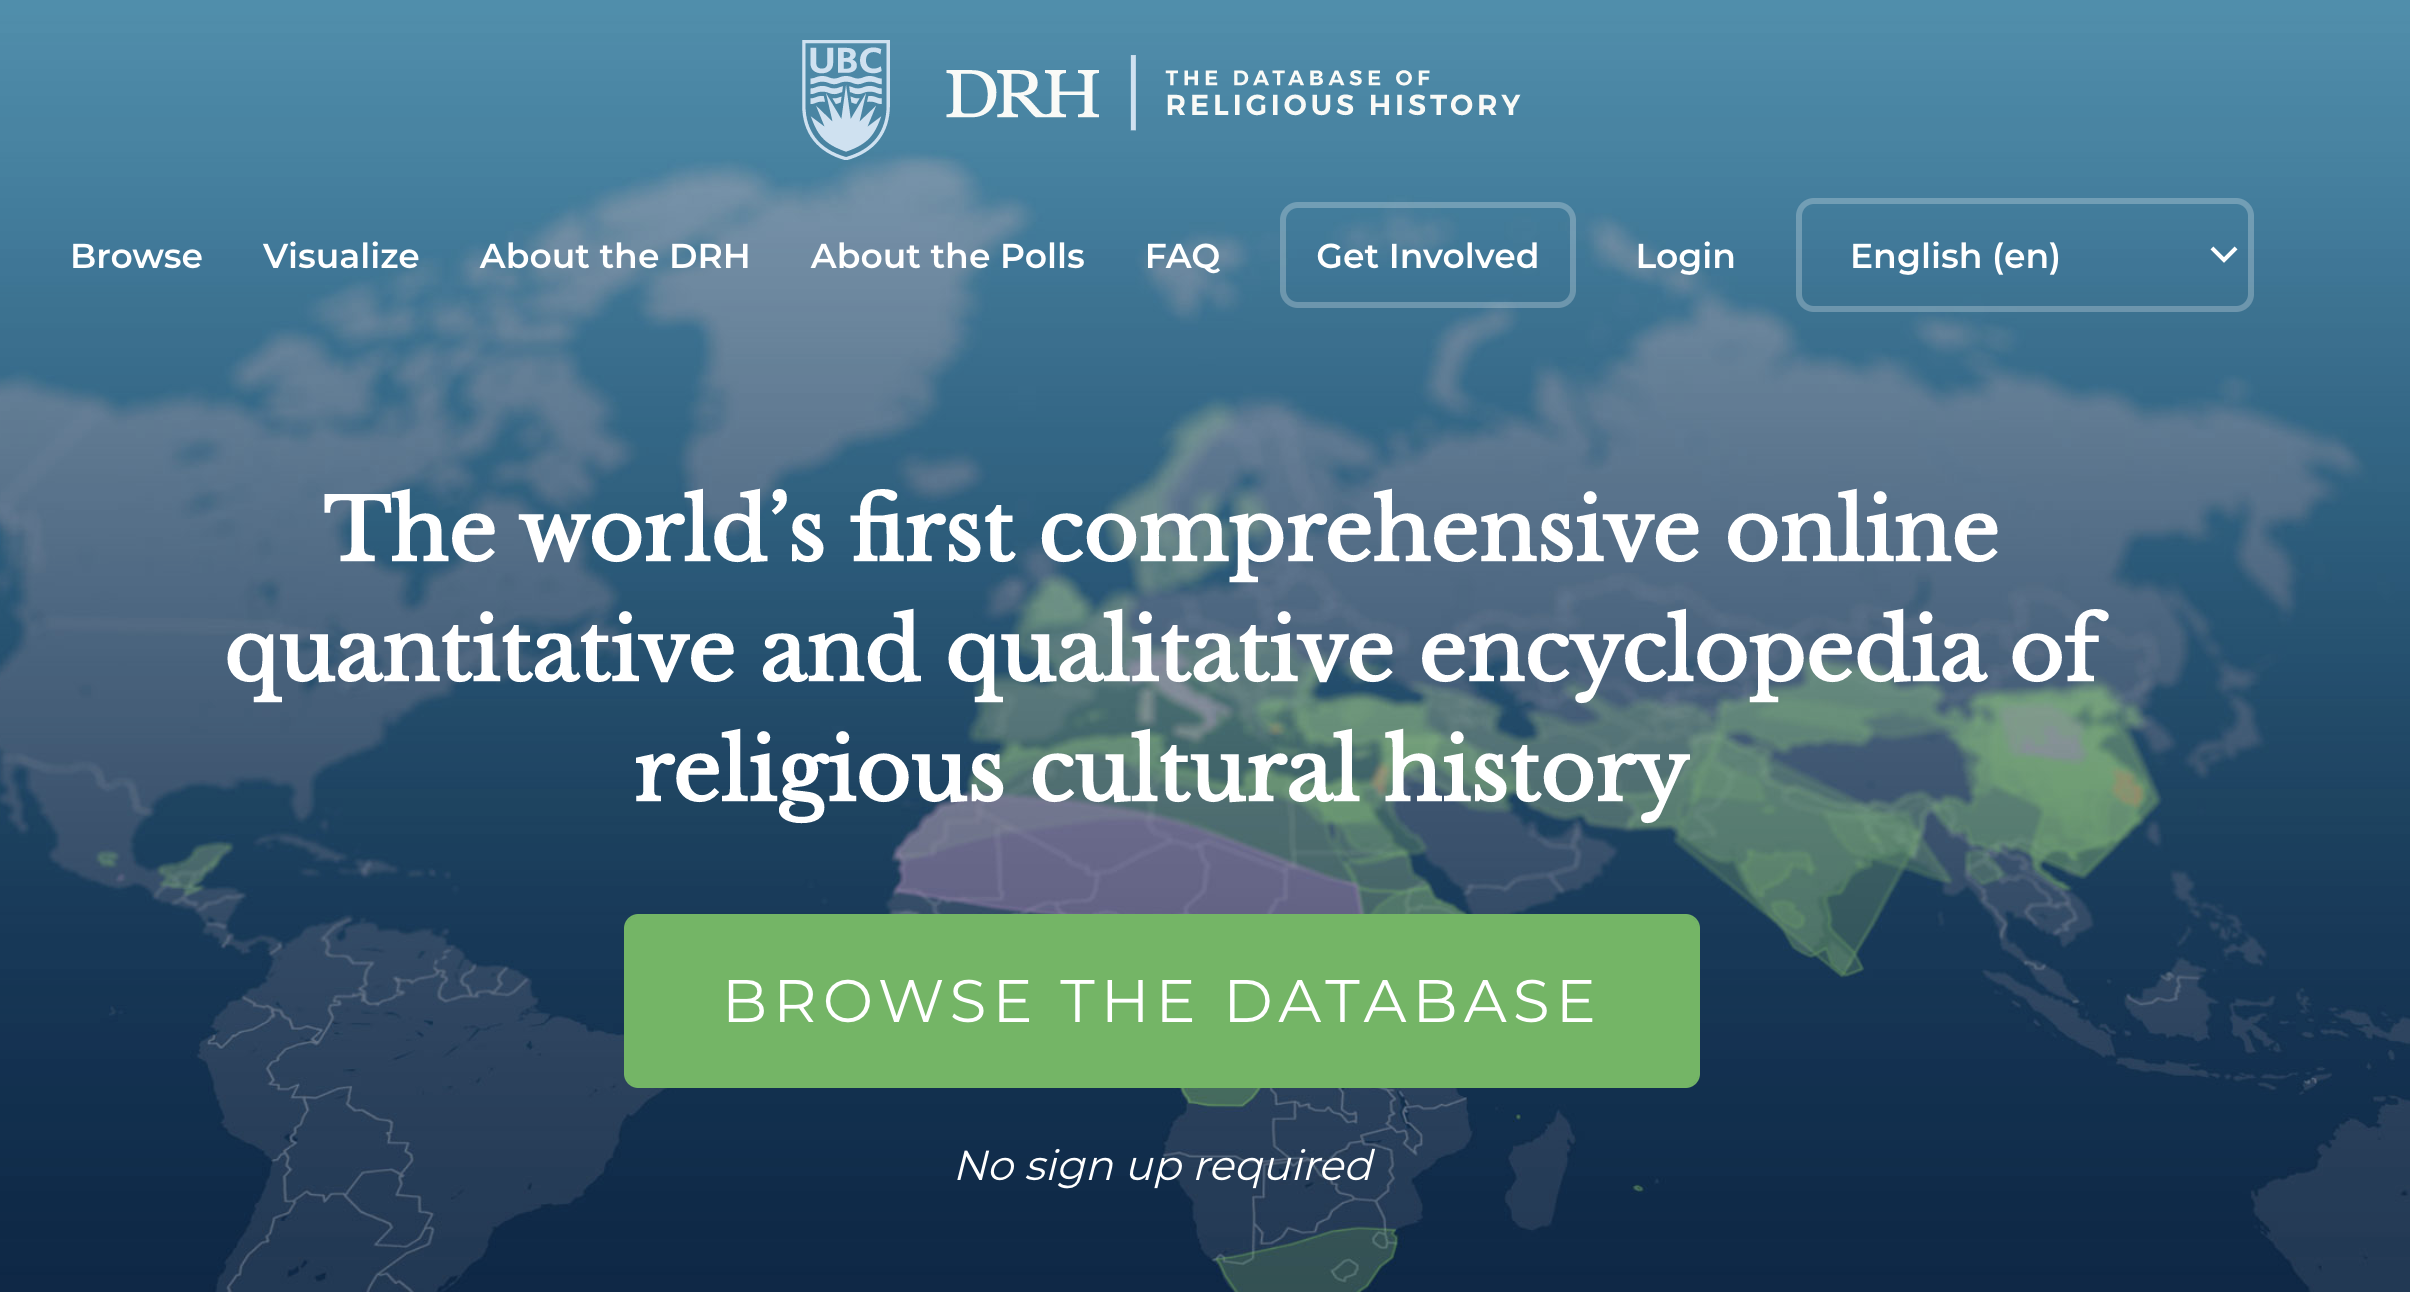 The Database of Religious History